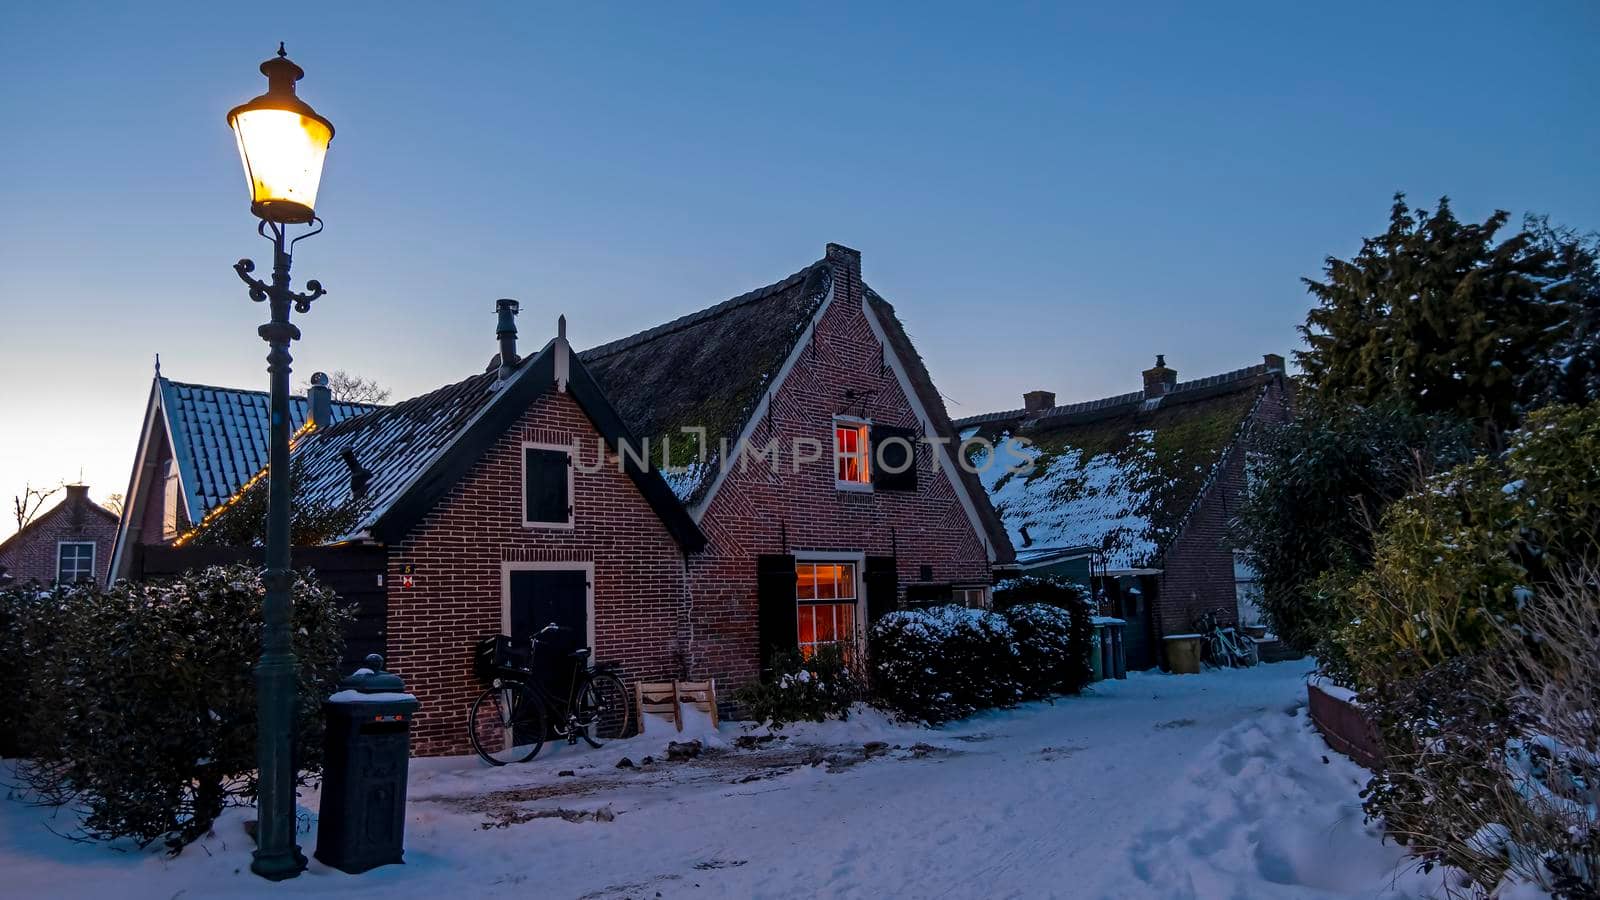 Snowy old traditional dutch houses in the countryside from the Netherlands in winter by devy